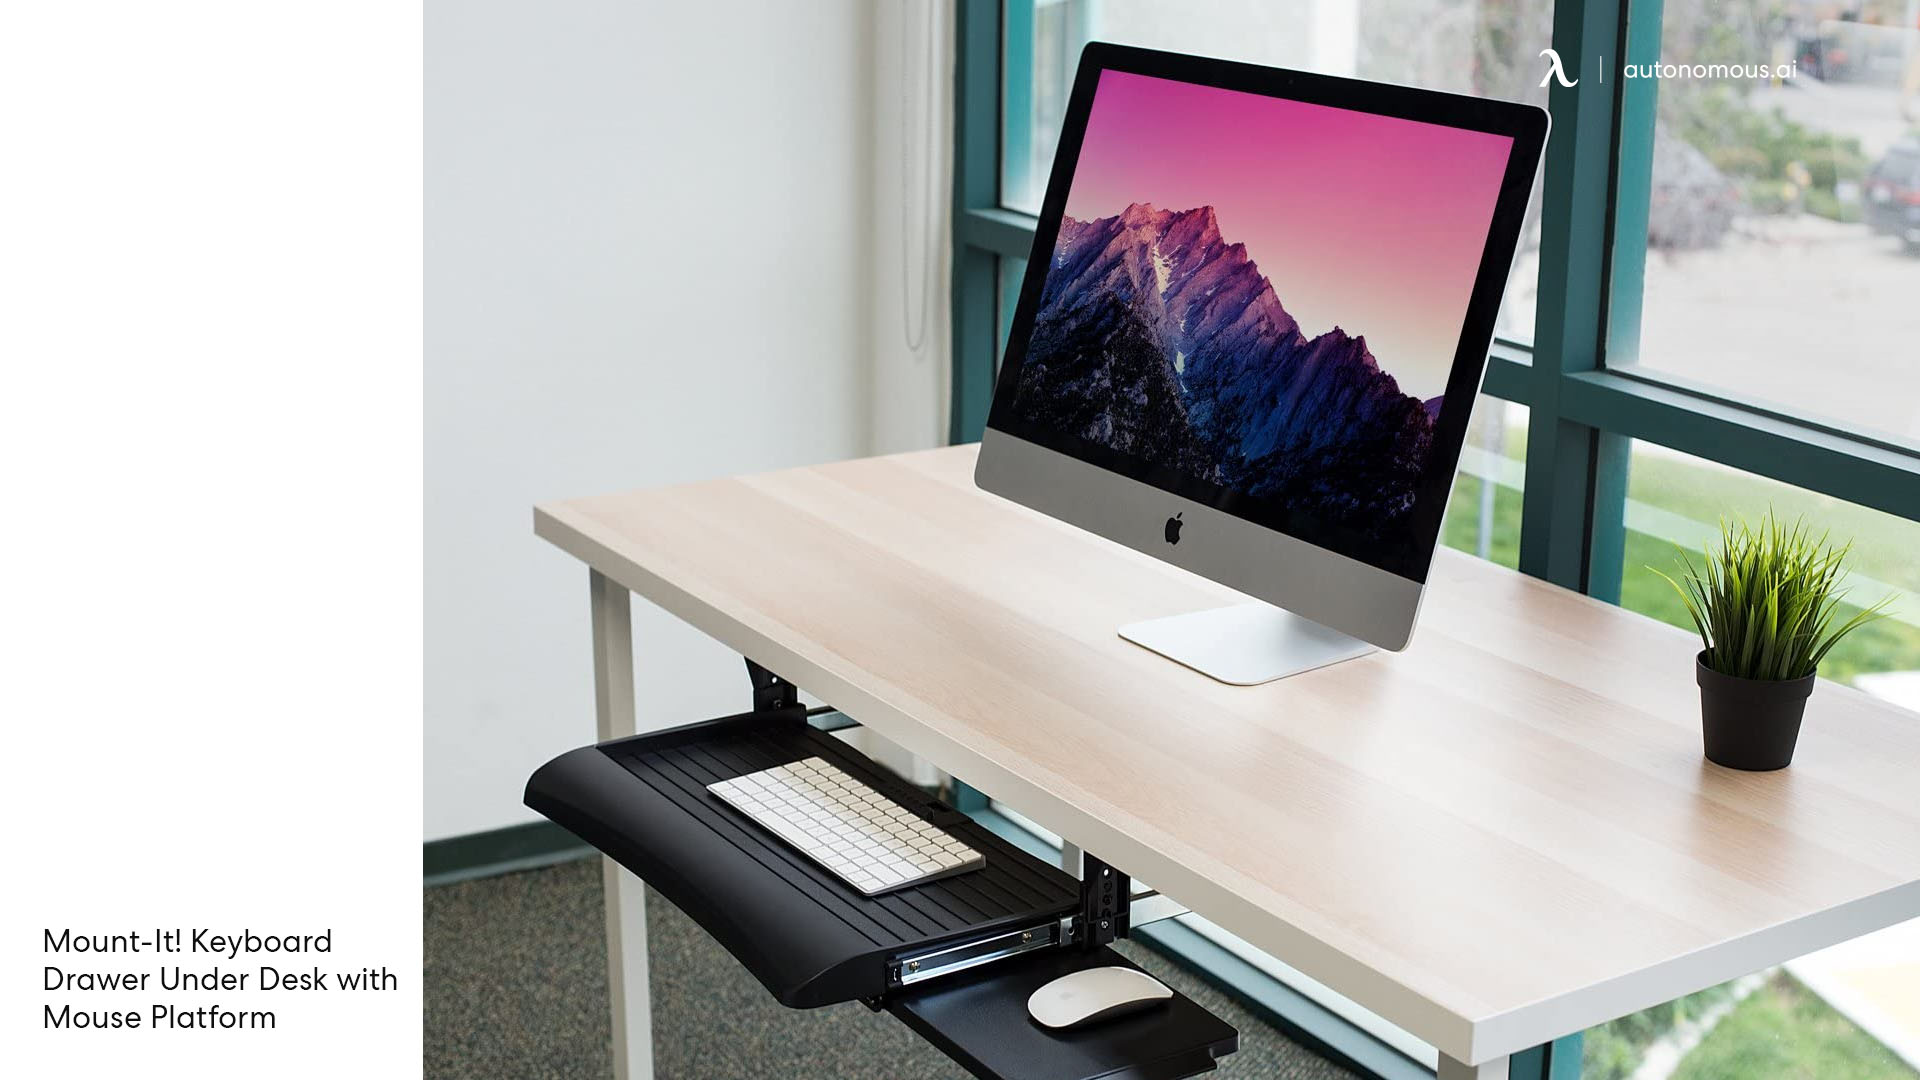 Keyboard and Mouse Platform by Mount-It! desk extension for standing